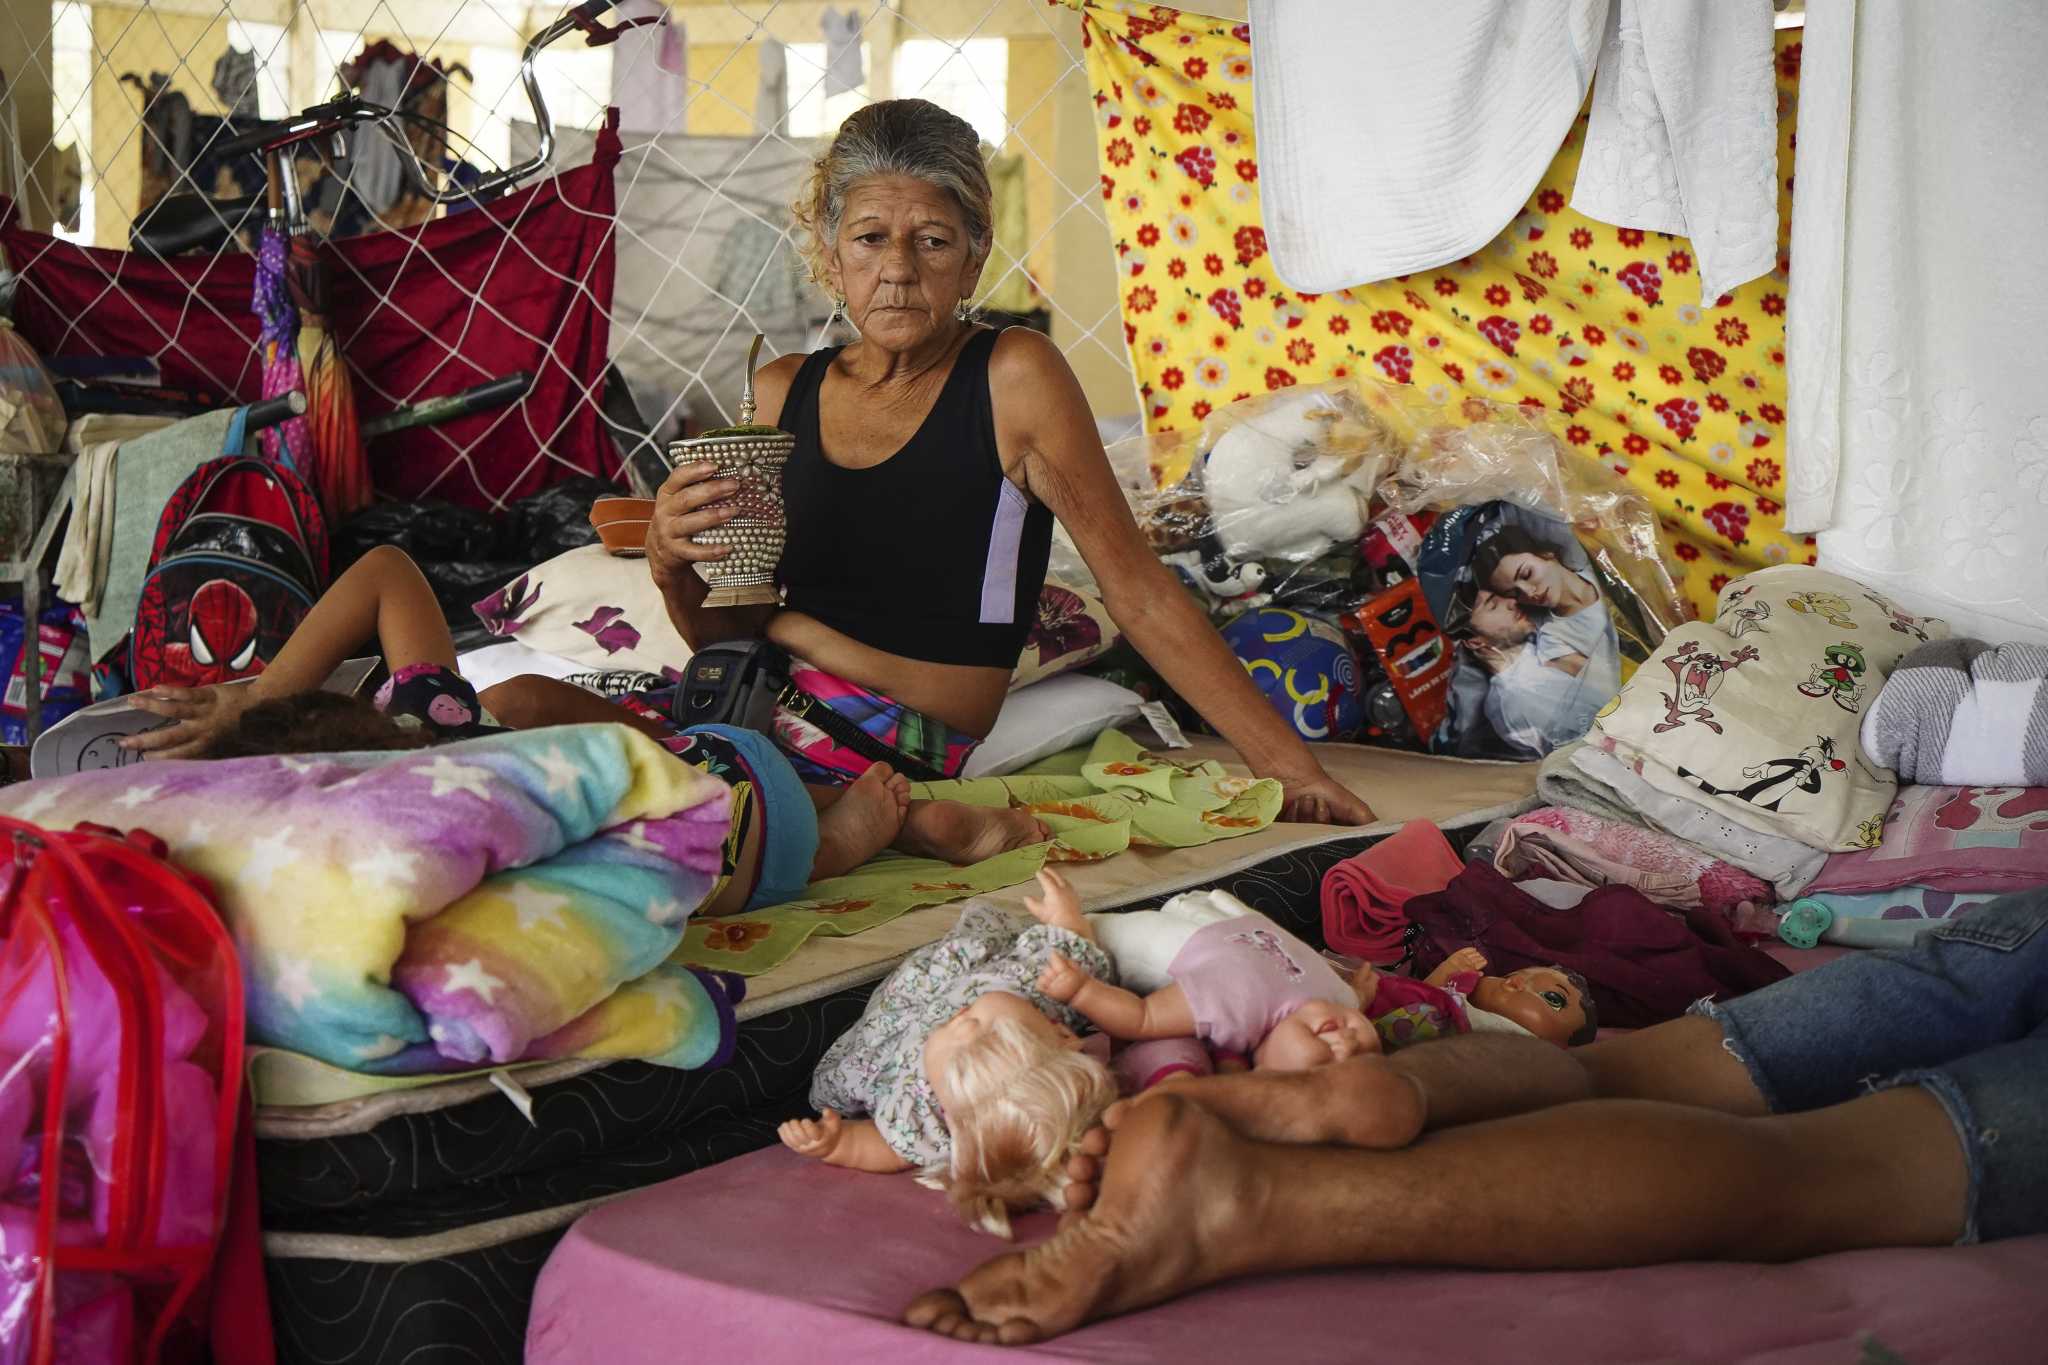 Flooding forecast to worsen in Brazil's south, where many who remain are poor